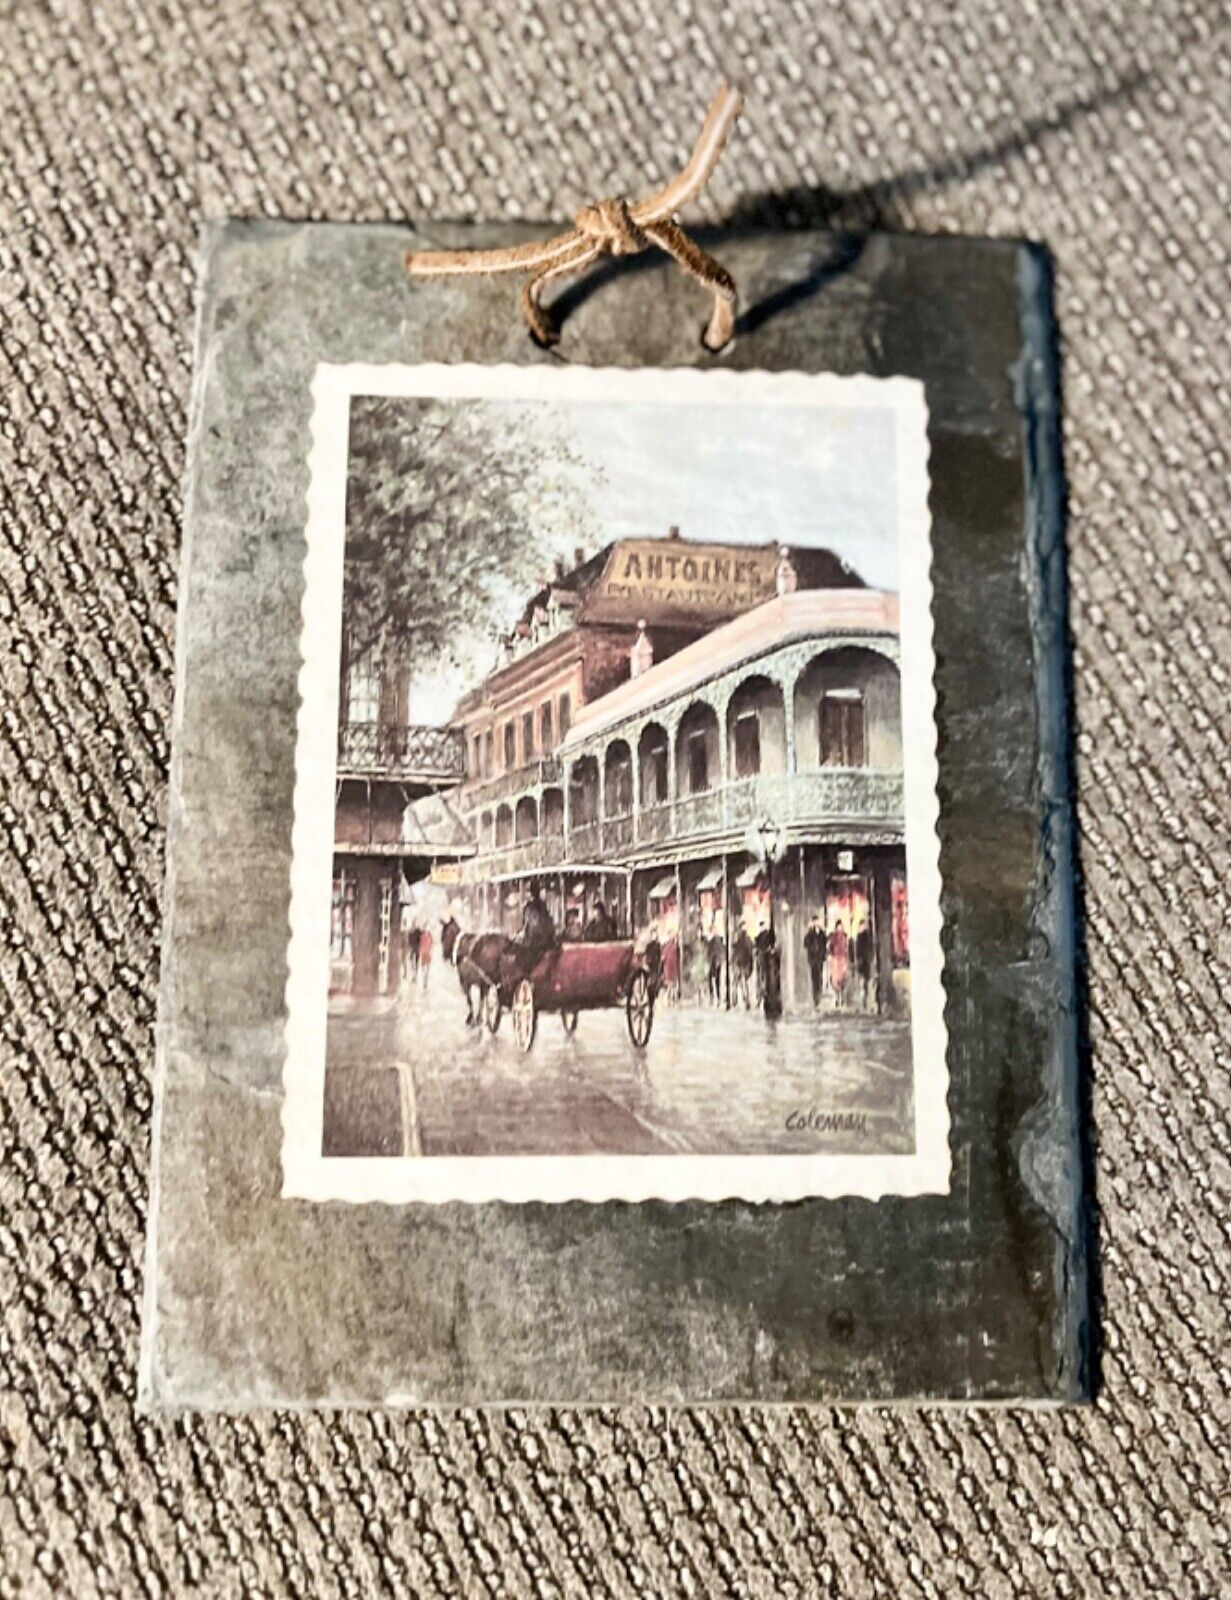 Vintage Slate Tiles from Vieux Carre of French Quarters and Jackson Square